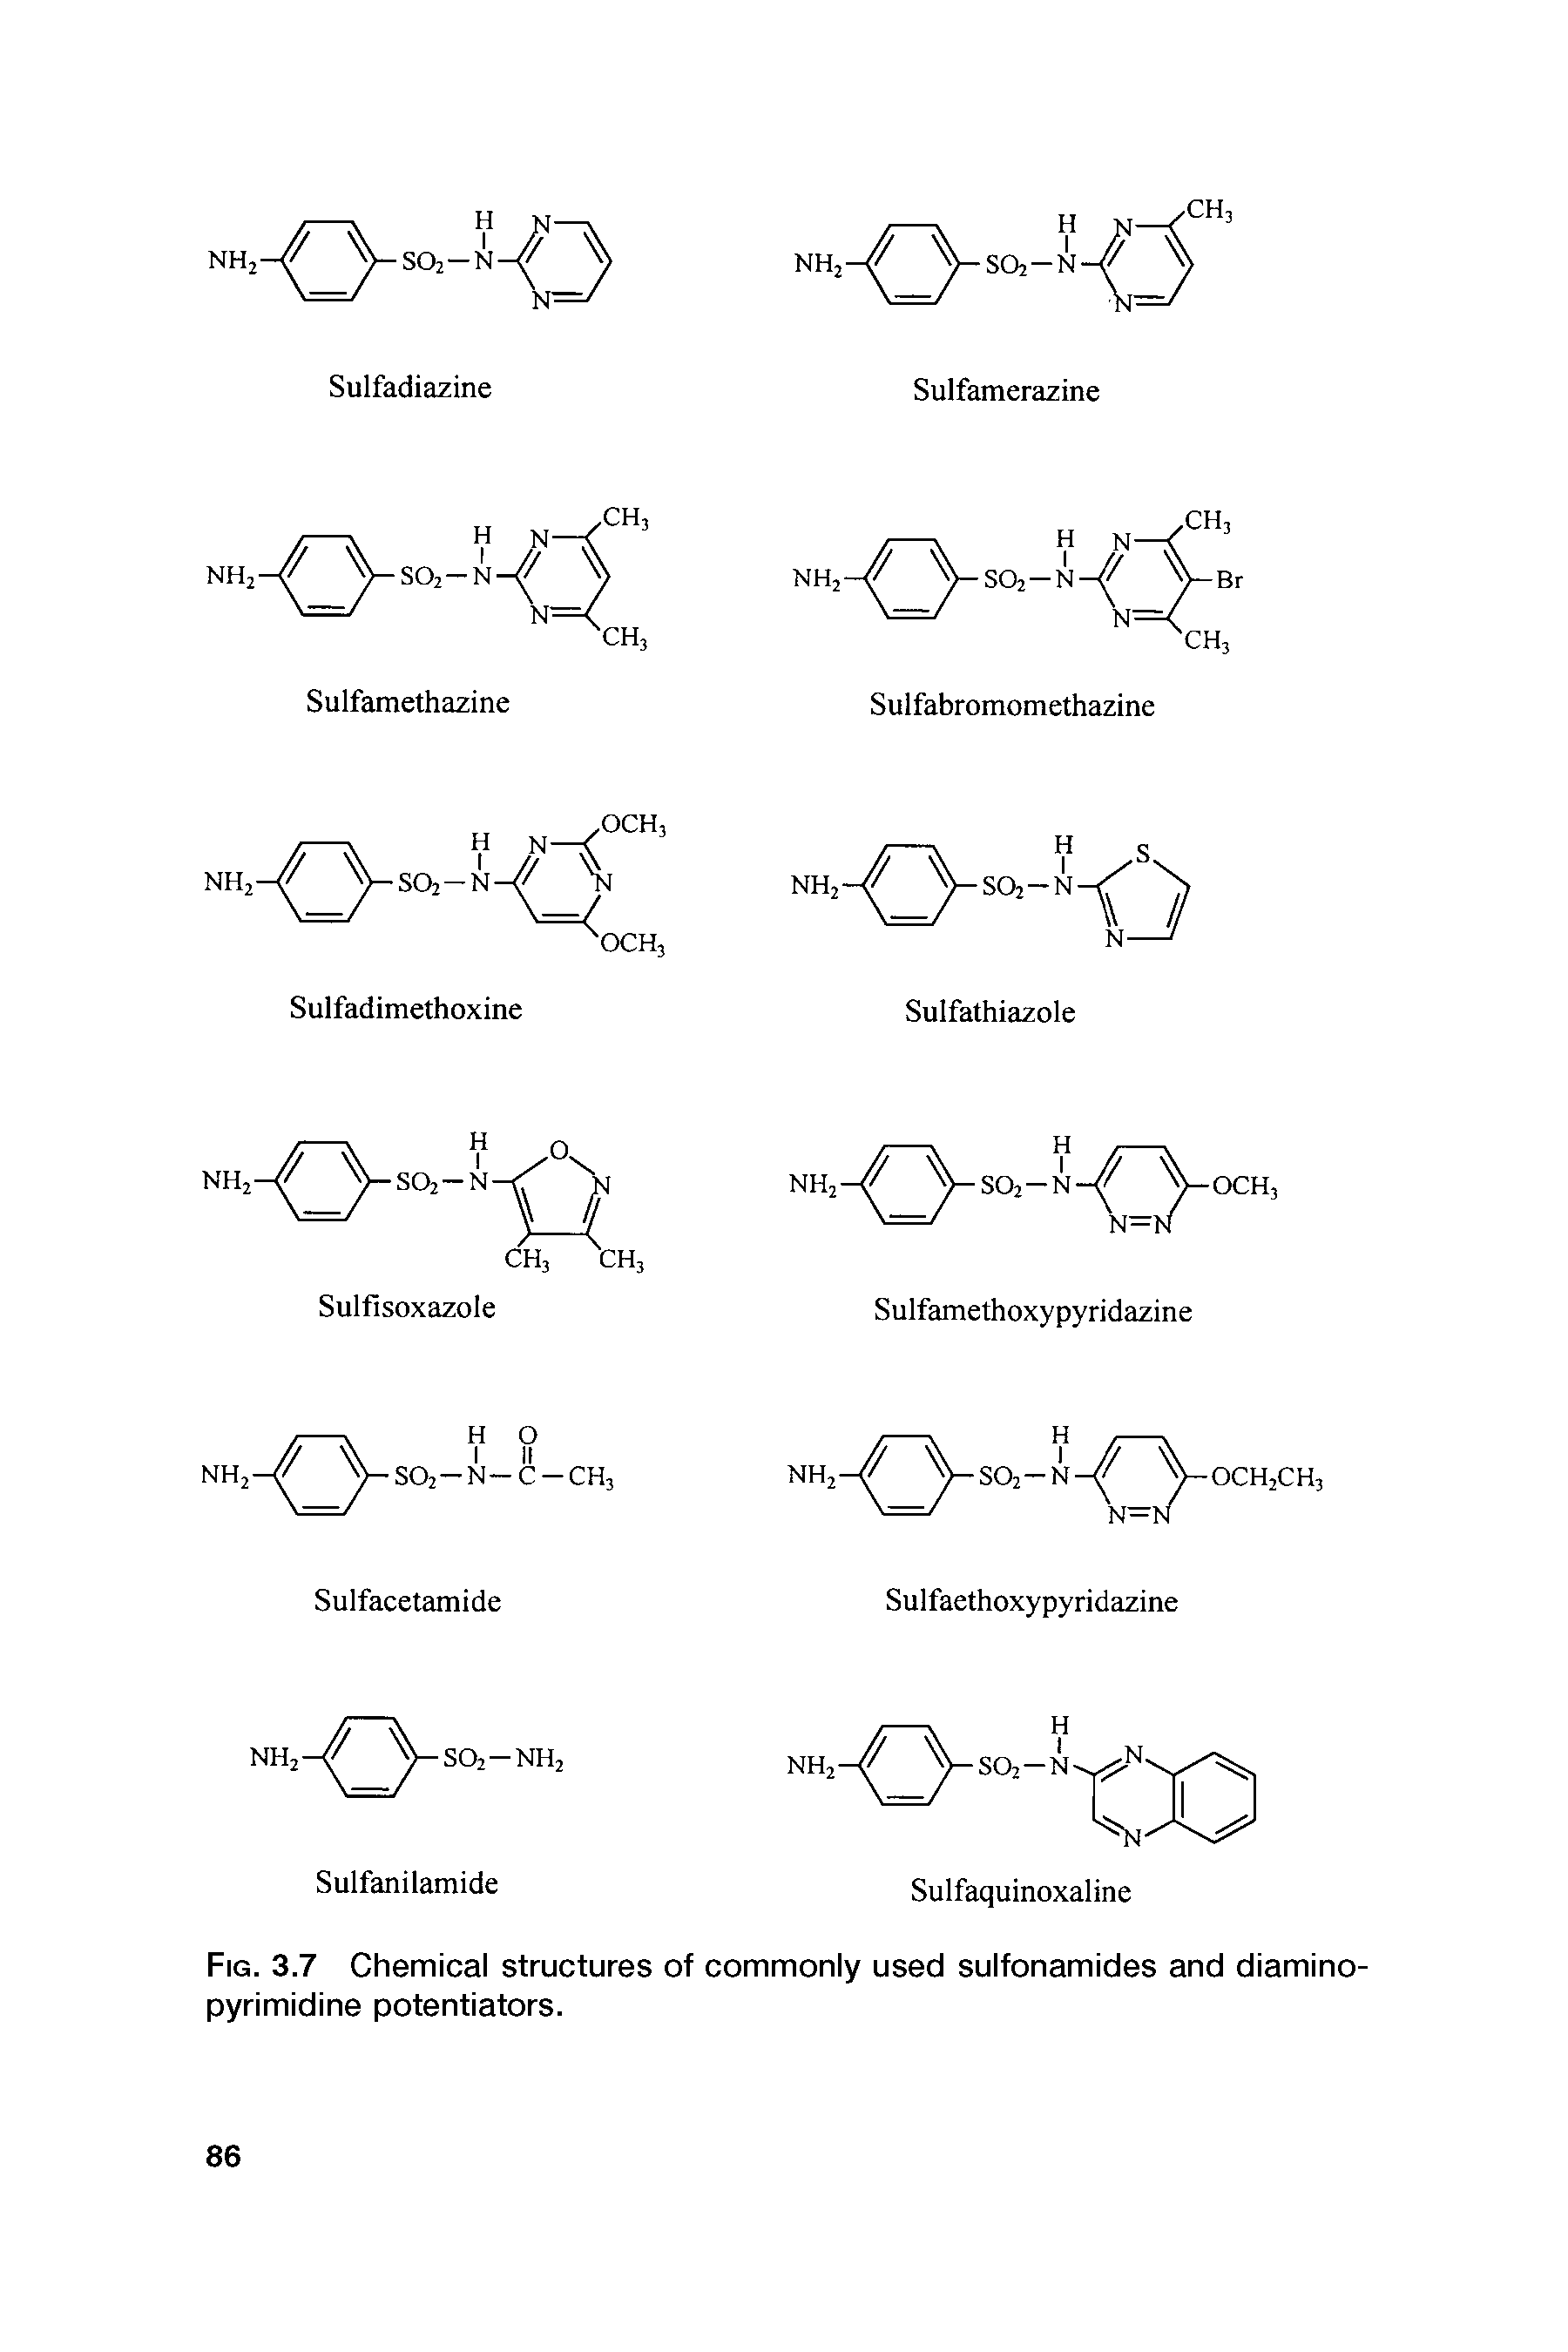 Fig. 3.7 Chemical structures of commonly used sulfonamides and diaminopyrimidine potentiators.